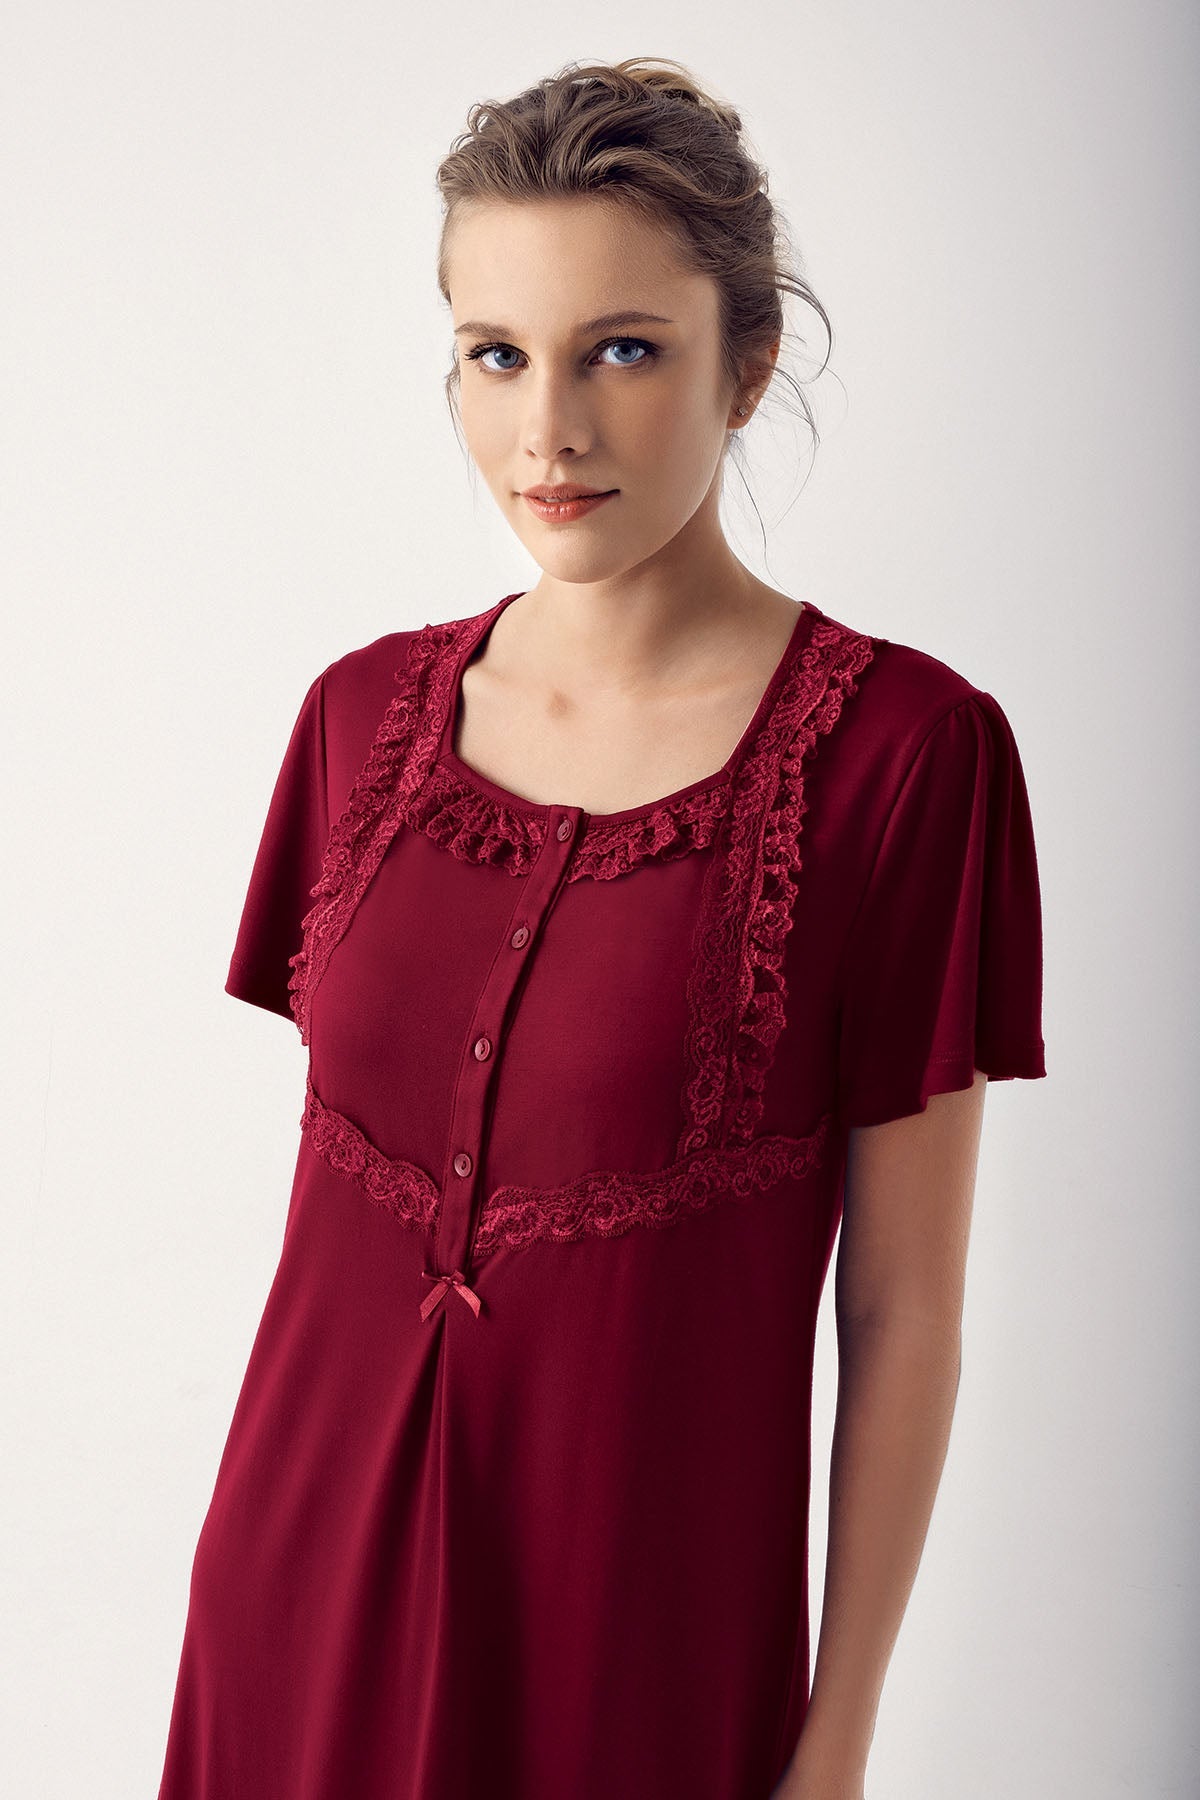 Square Collar Lace Plus Size Maternity & Nursing Nightgown Claret Red - 14110